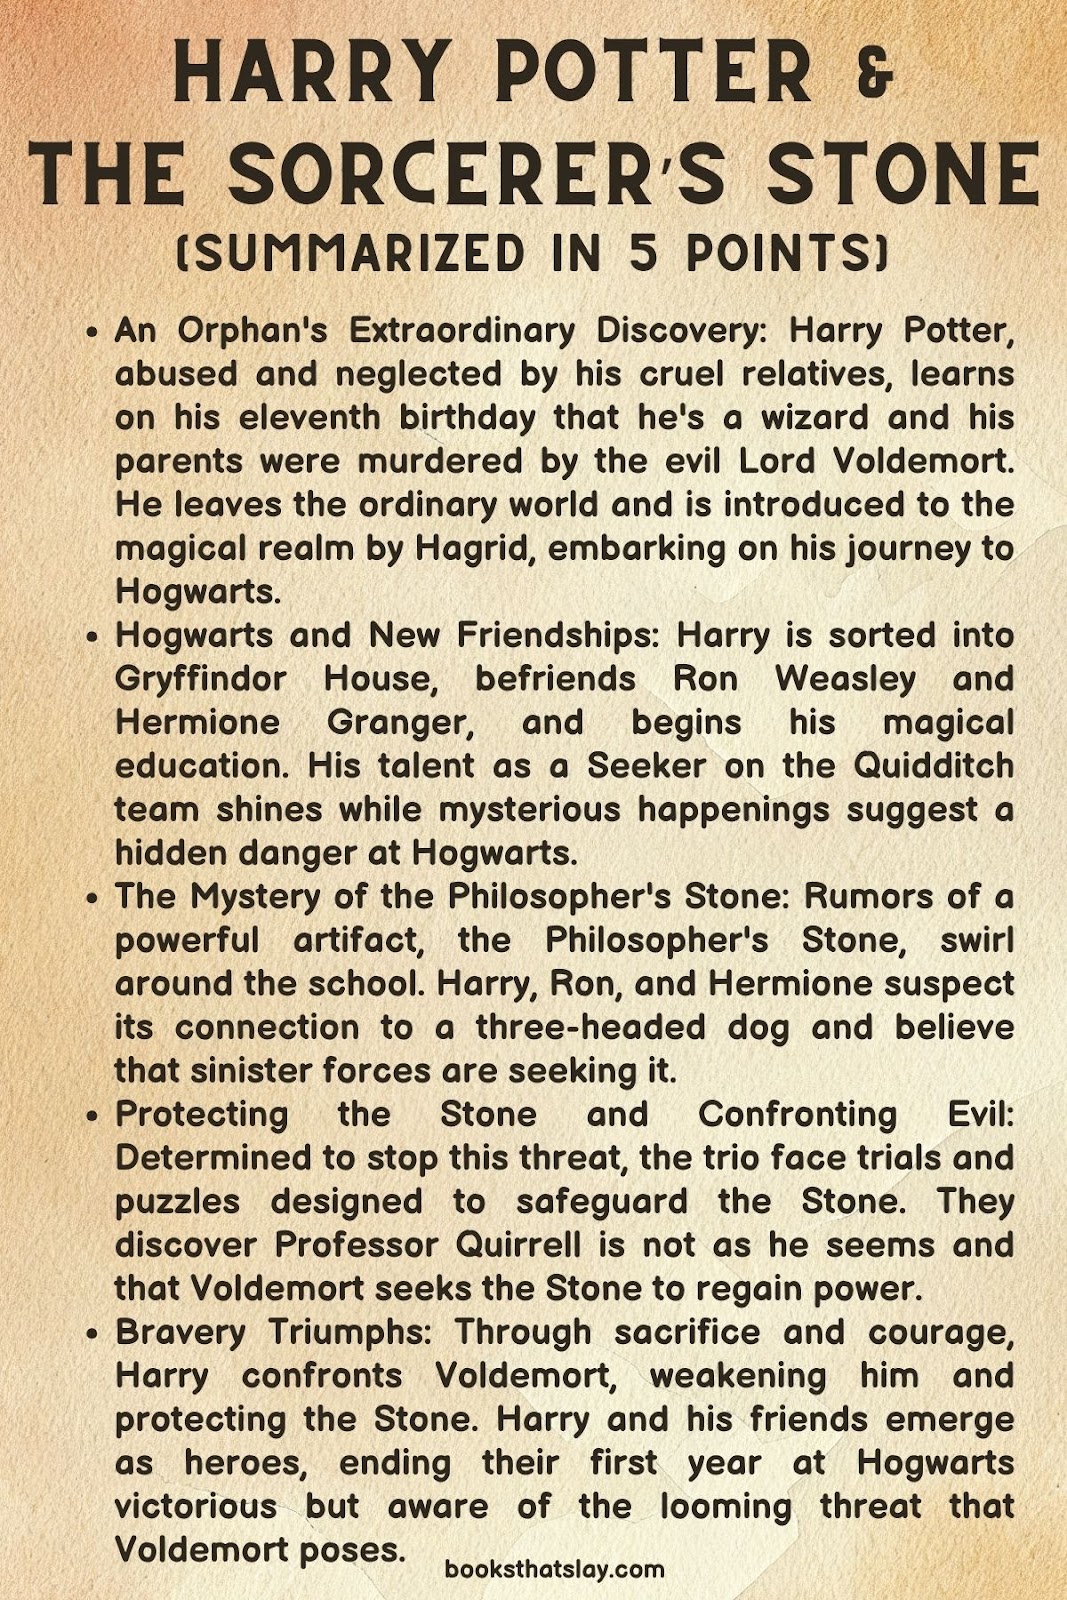 Harry Potter and the Sorcerer's Stone Summary, Characters and Themes